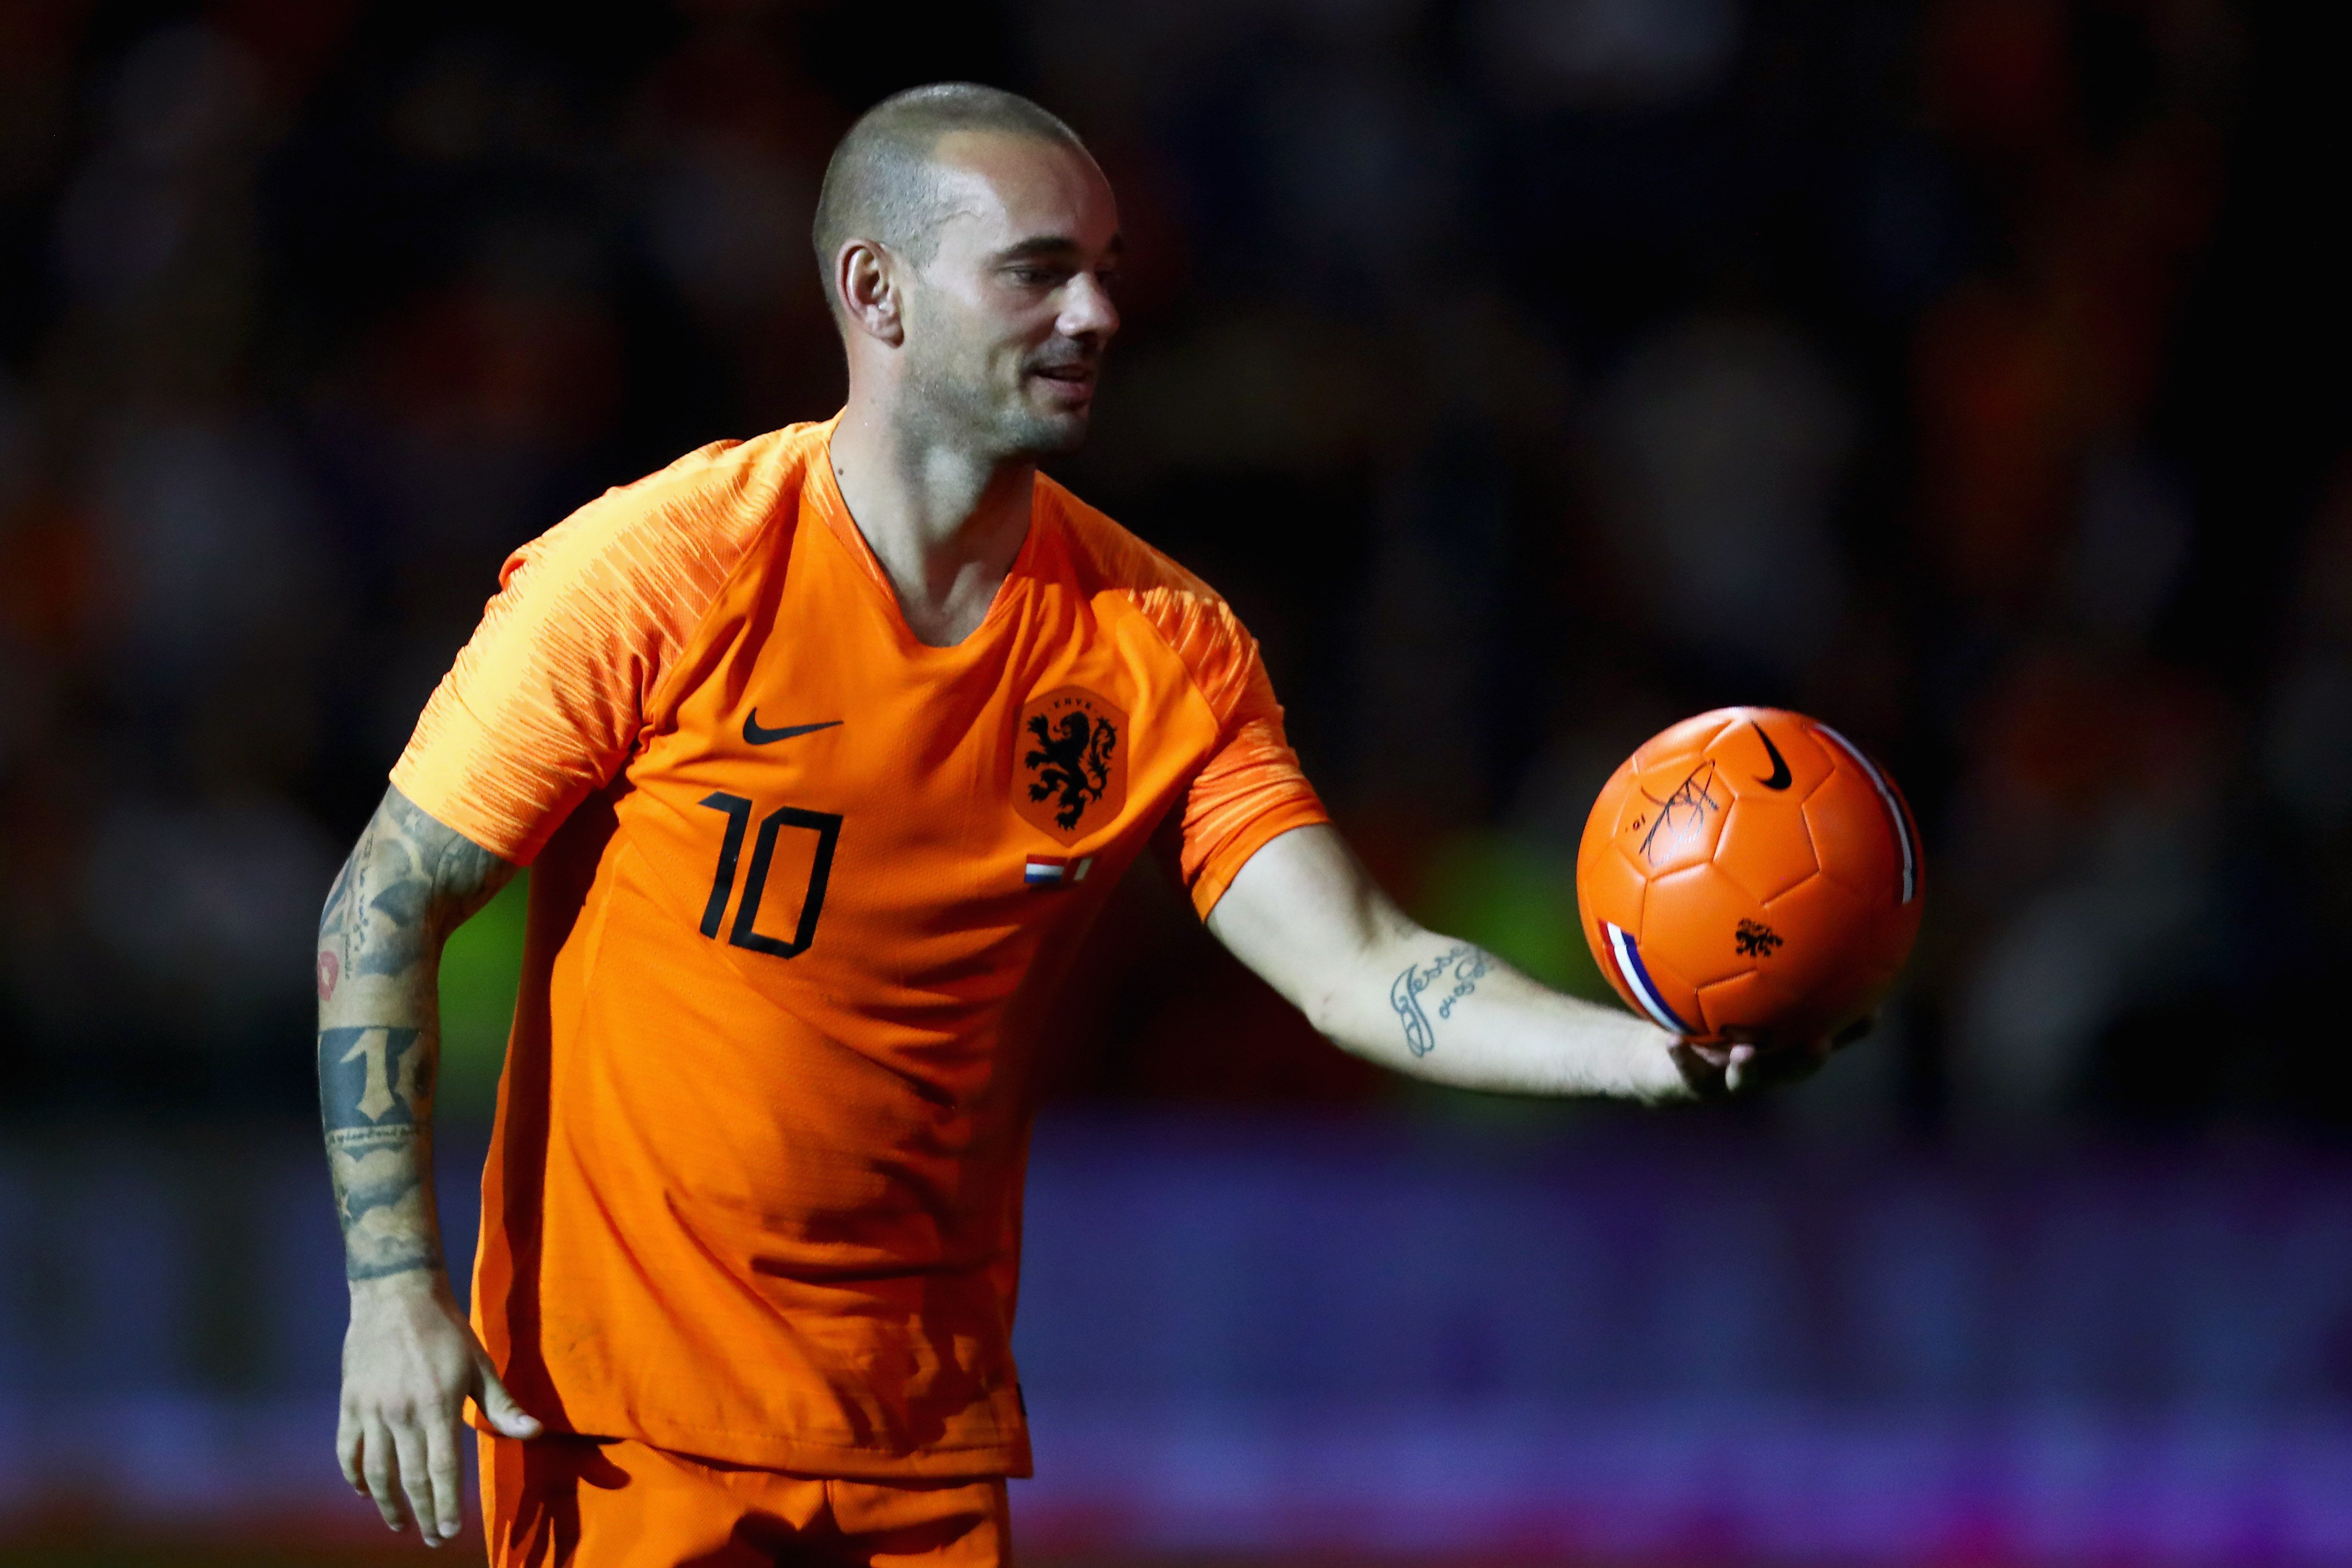 Wesley Sneijder thanks the fans